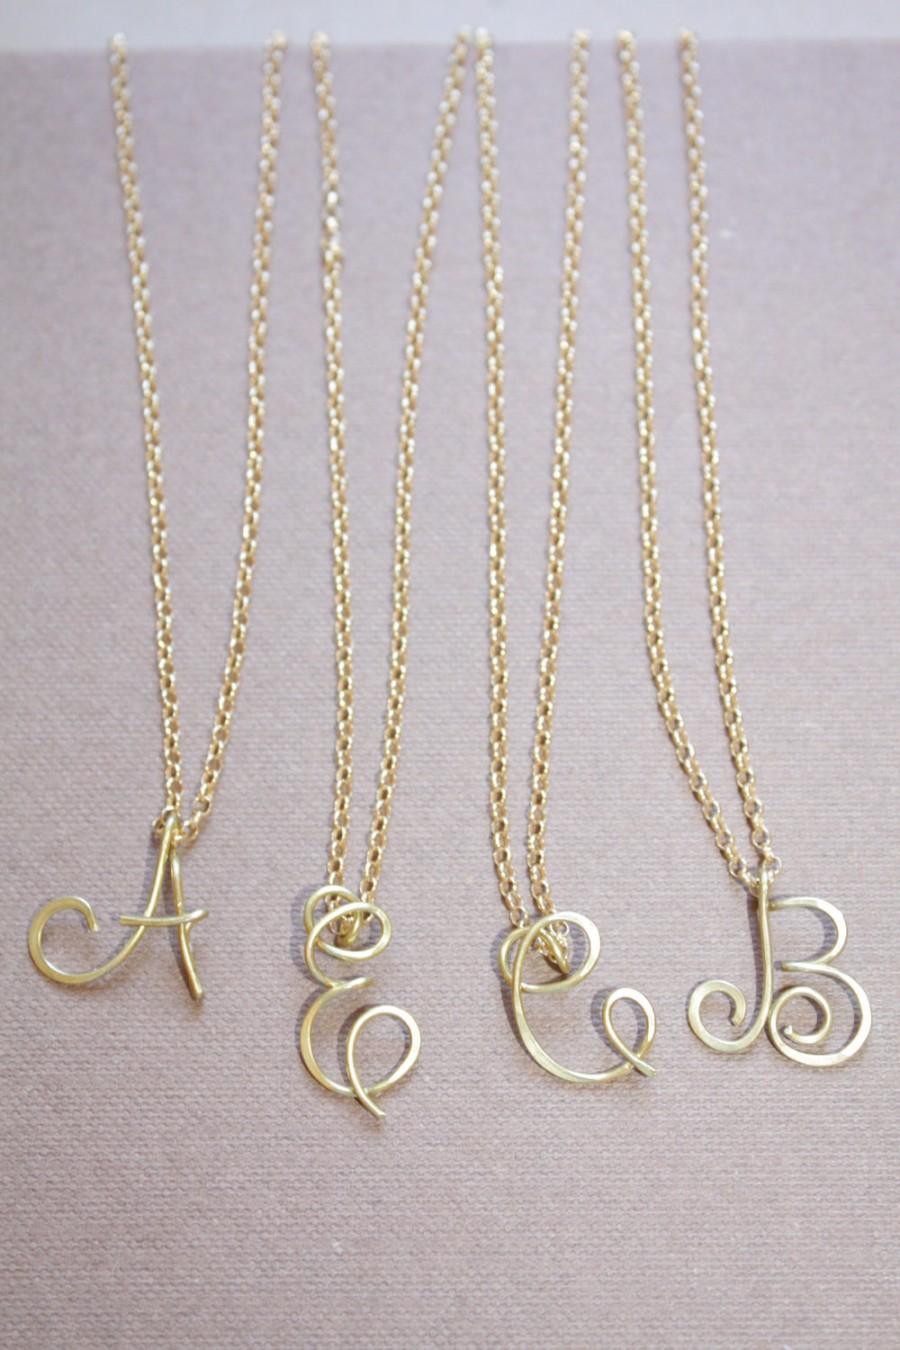 Wedding - Uppercase Initial Letter Necklace Personalized Cursive Letter Necklace Gold Letter Necklace Silver Initial Necklace Cursive Letter Di&De